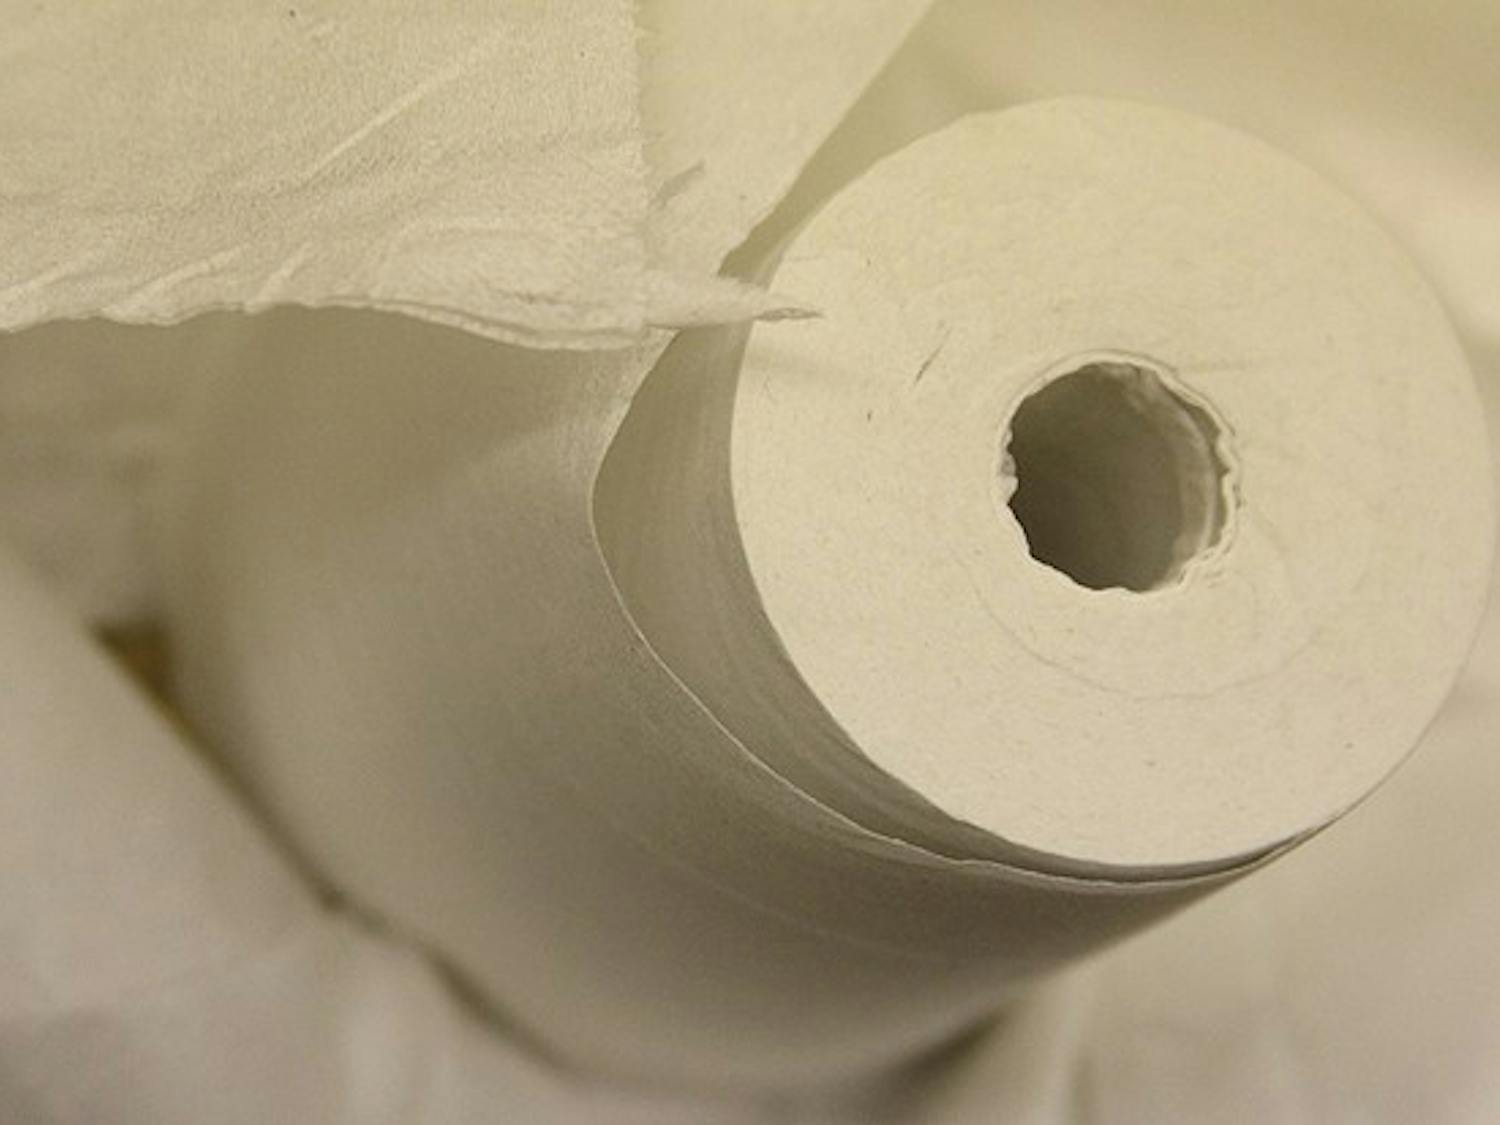 In response to complaints about the quality of Duke’s toilet paper, the University is switching to a two-ply model.